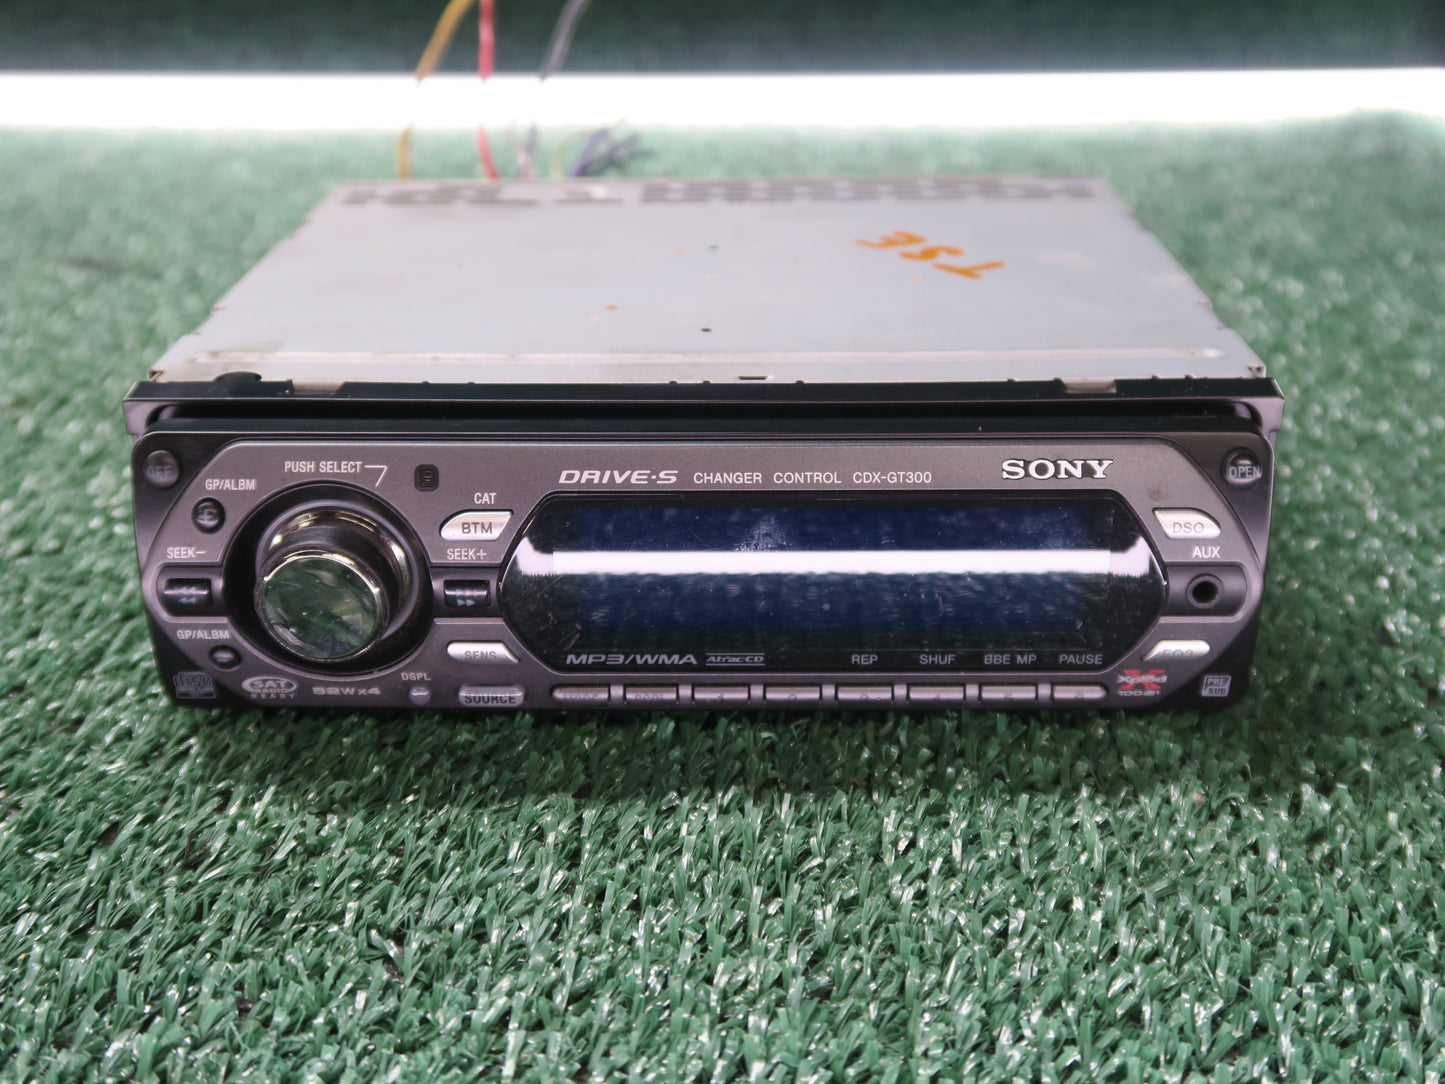 SONY CDX-GT300 Car Stereo Radio CD AUX Head Unit Excellent Condition